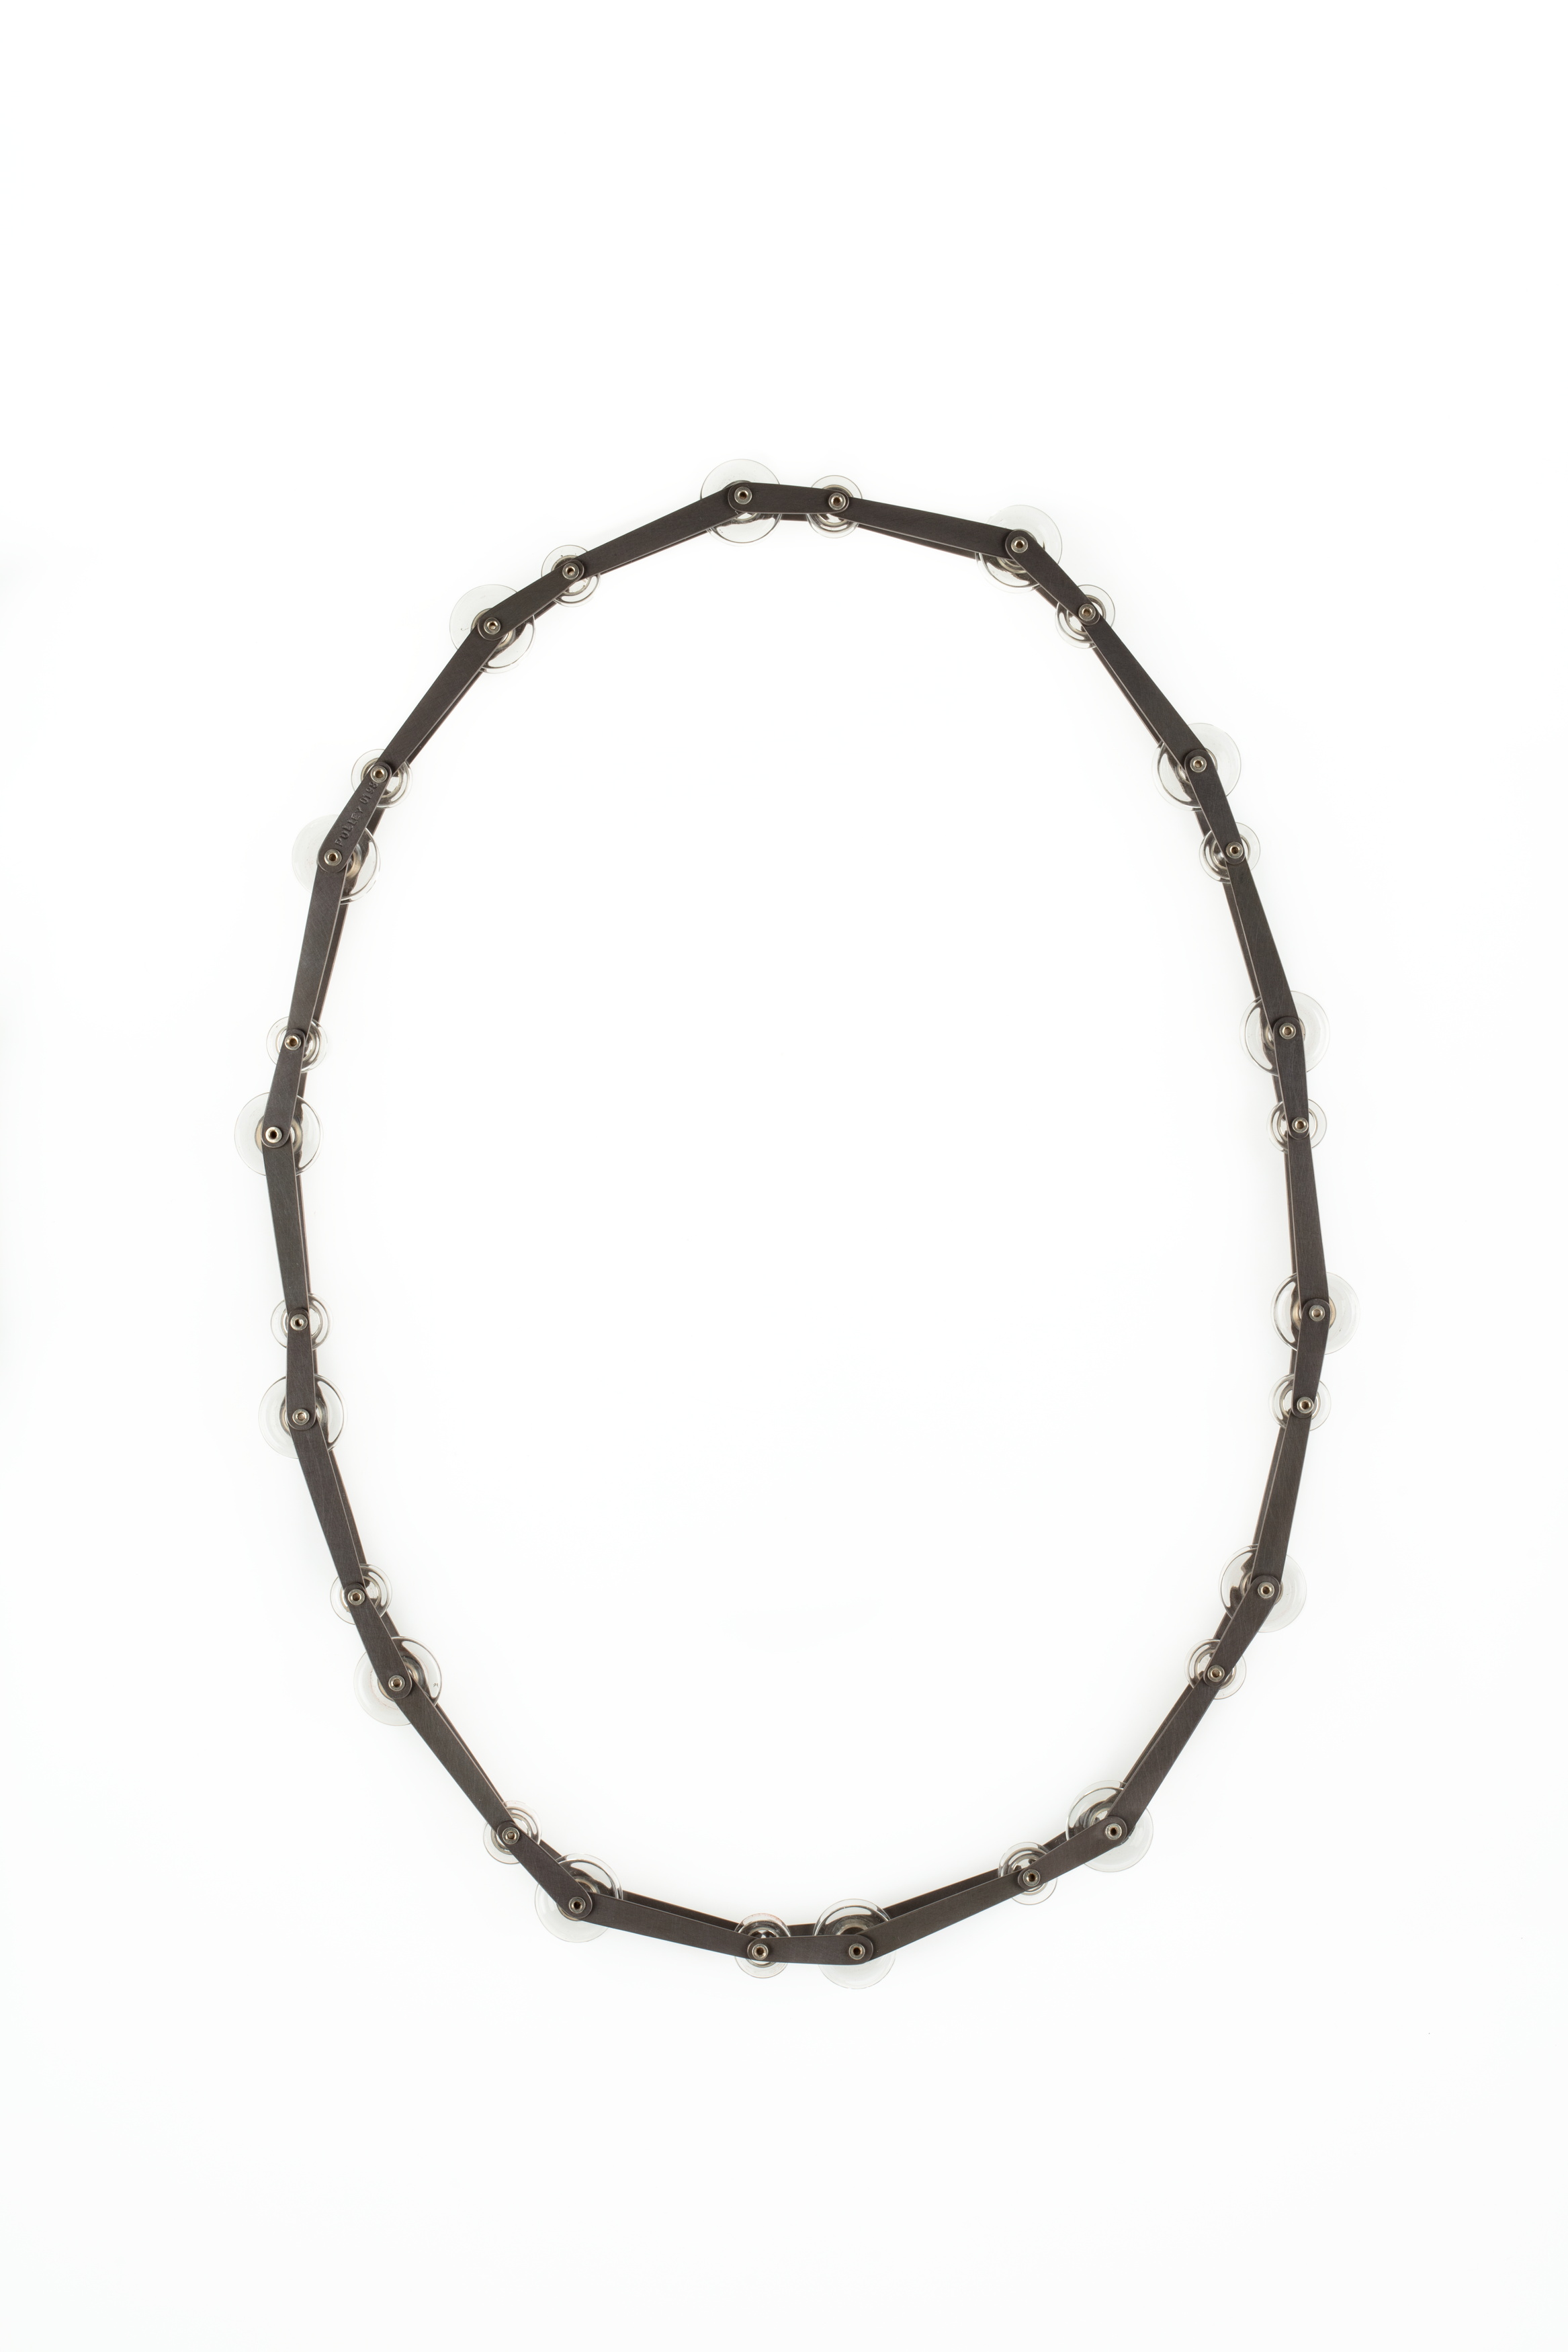 'Pulley' necklace by Blanche Tilden